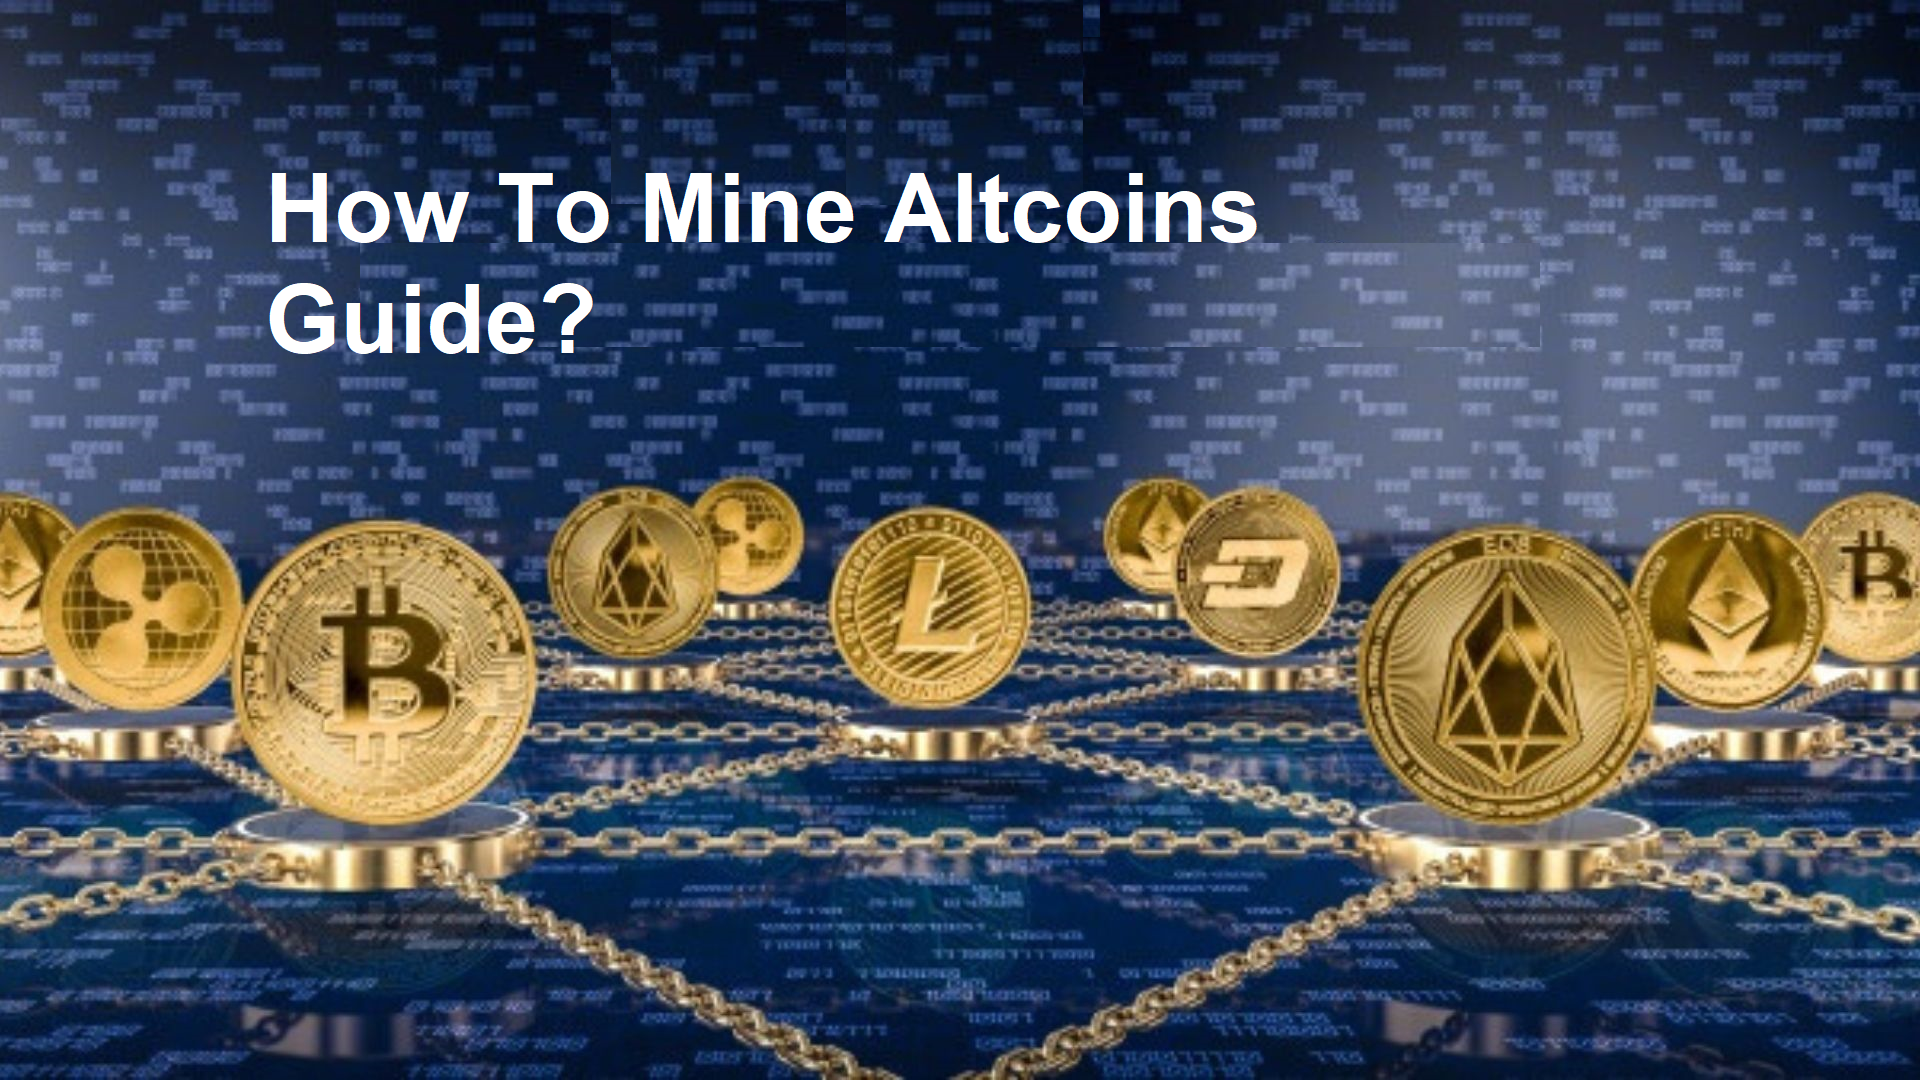 'how to mine altcoins guide' written